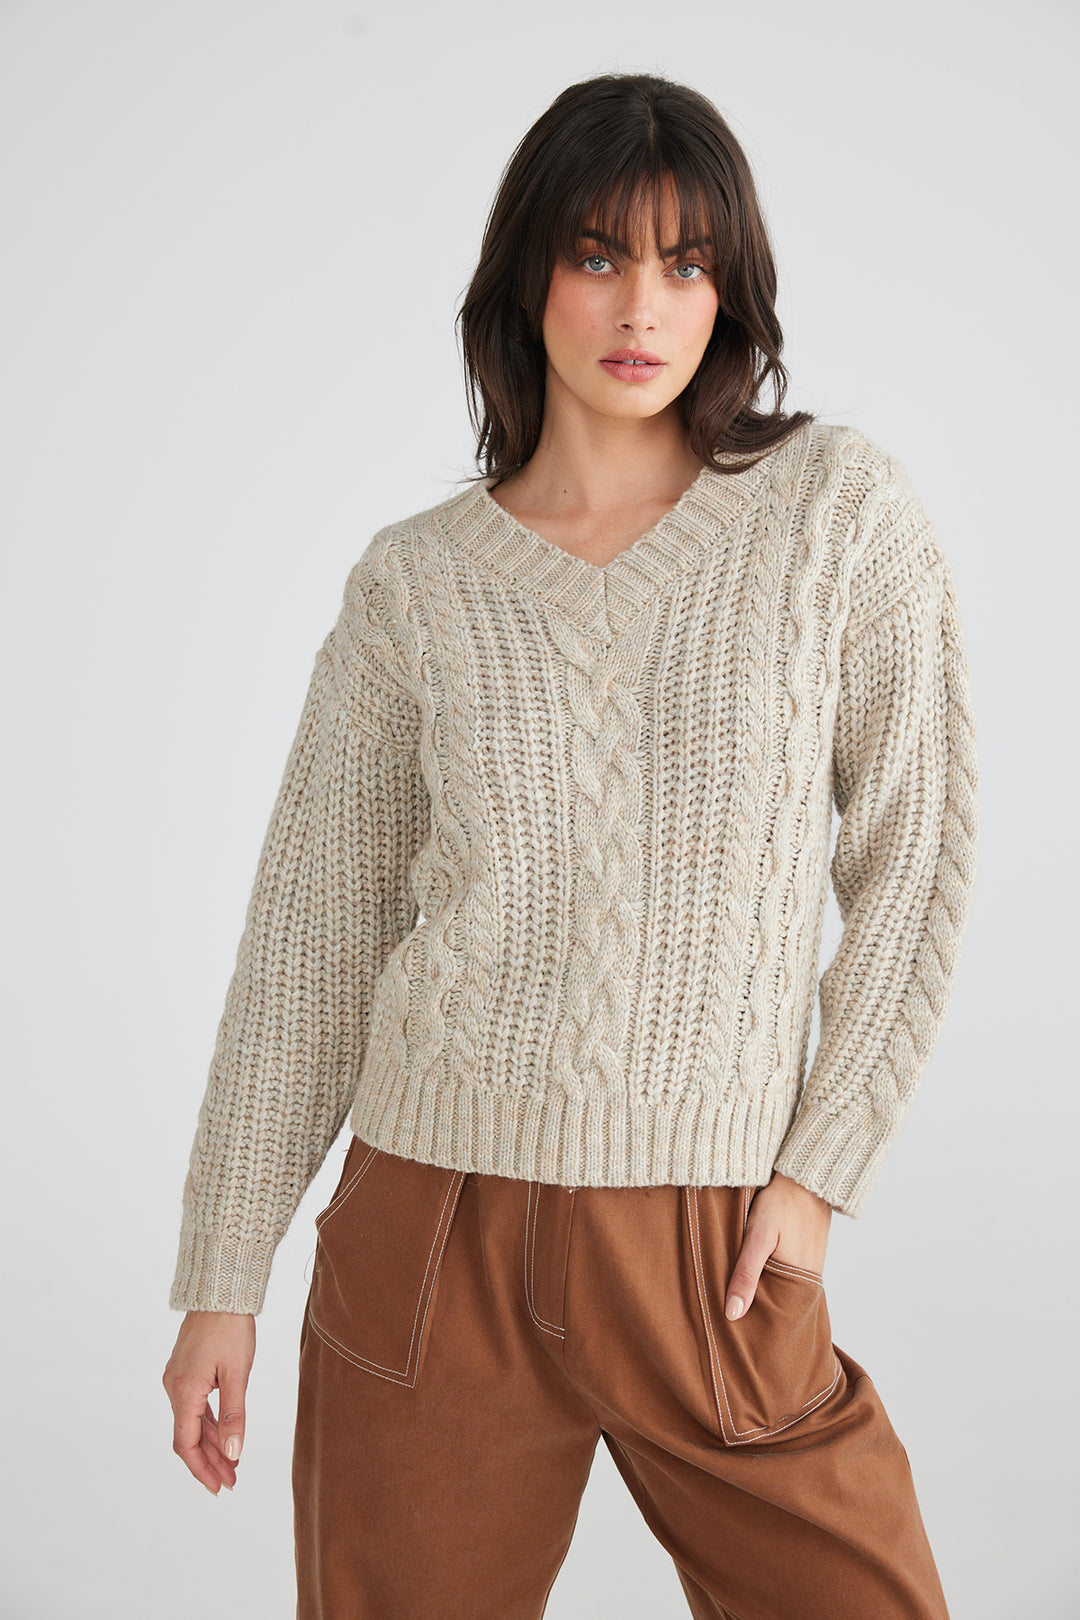 The Trixie Knit is a cute cosy knit the features a gorgeous cable knit pattern, this versatile knit is easy to wear and will update your season wardrobe.    Brand Talisman  Style TA23030-1 Colour Natural Marle 77% Acrylic 9% Nylon 6% Polybutylene Terephthalate  8% Wool  Cold Hand Wash 